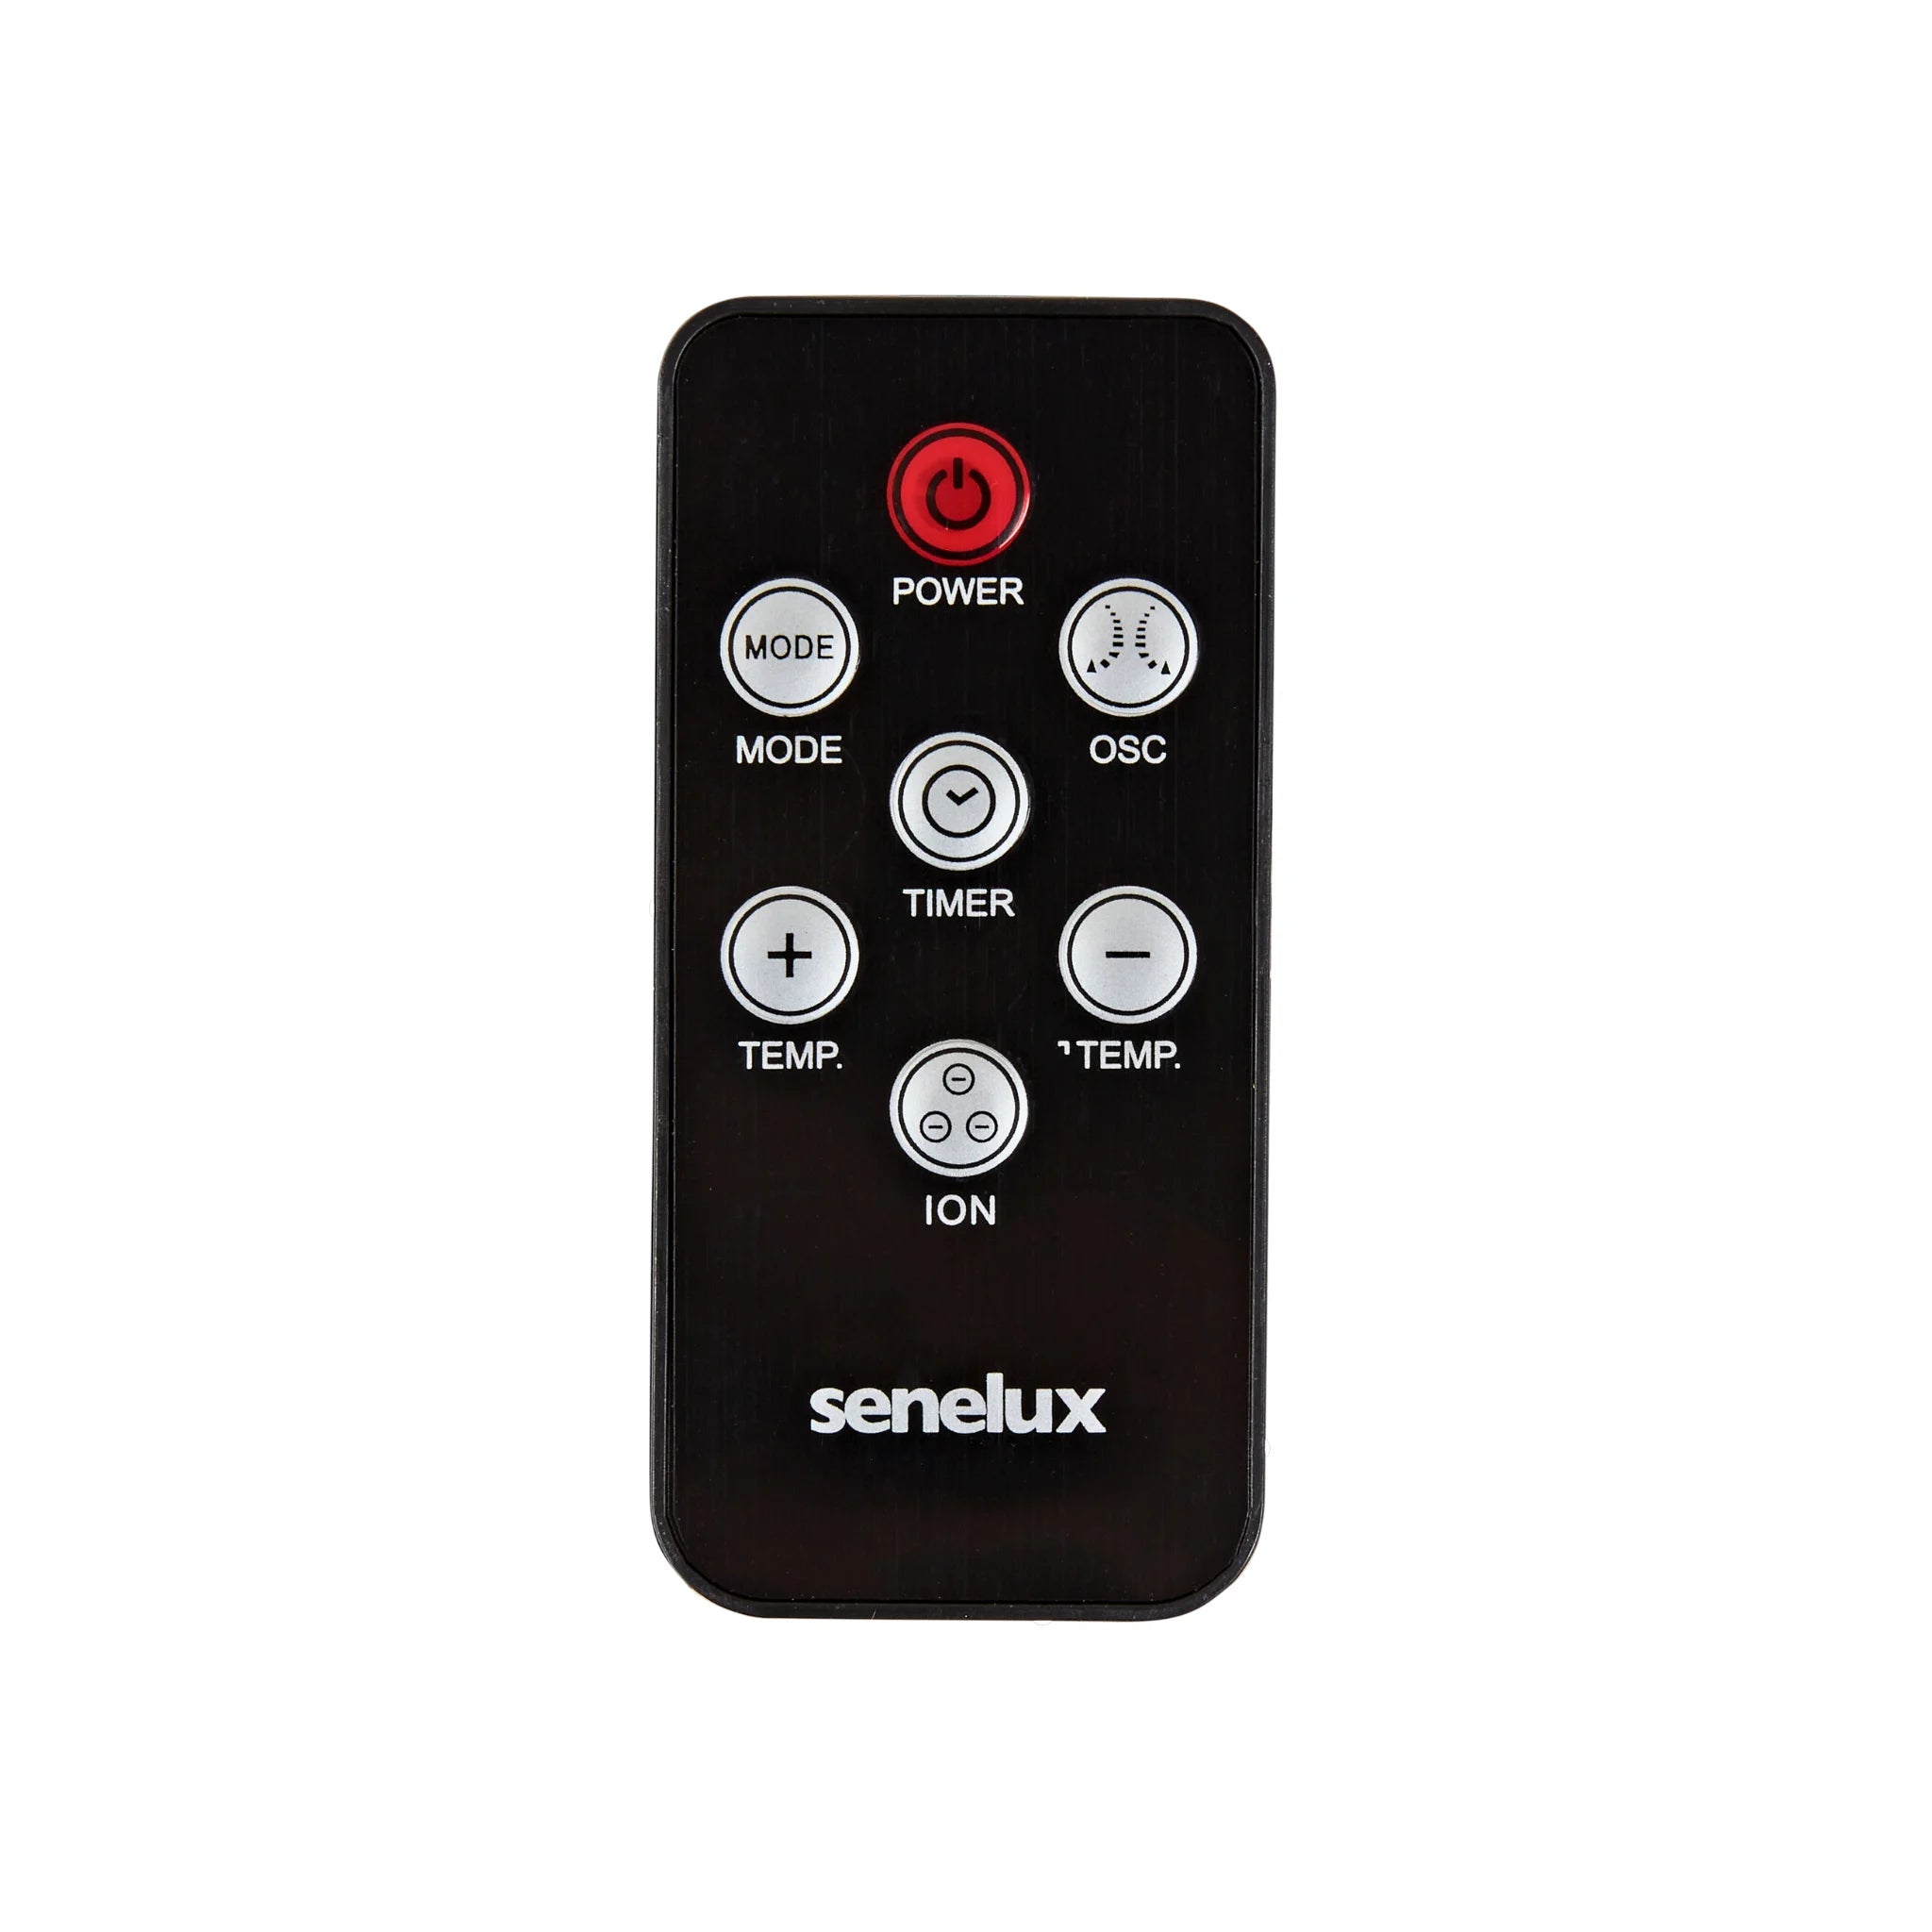 Included remote control for the Senelux 2000W Ceramic Heater. A full range of functionality including adjustable heating.